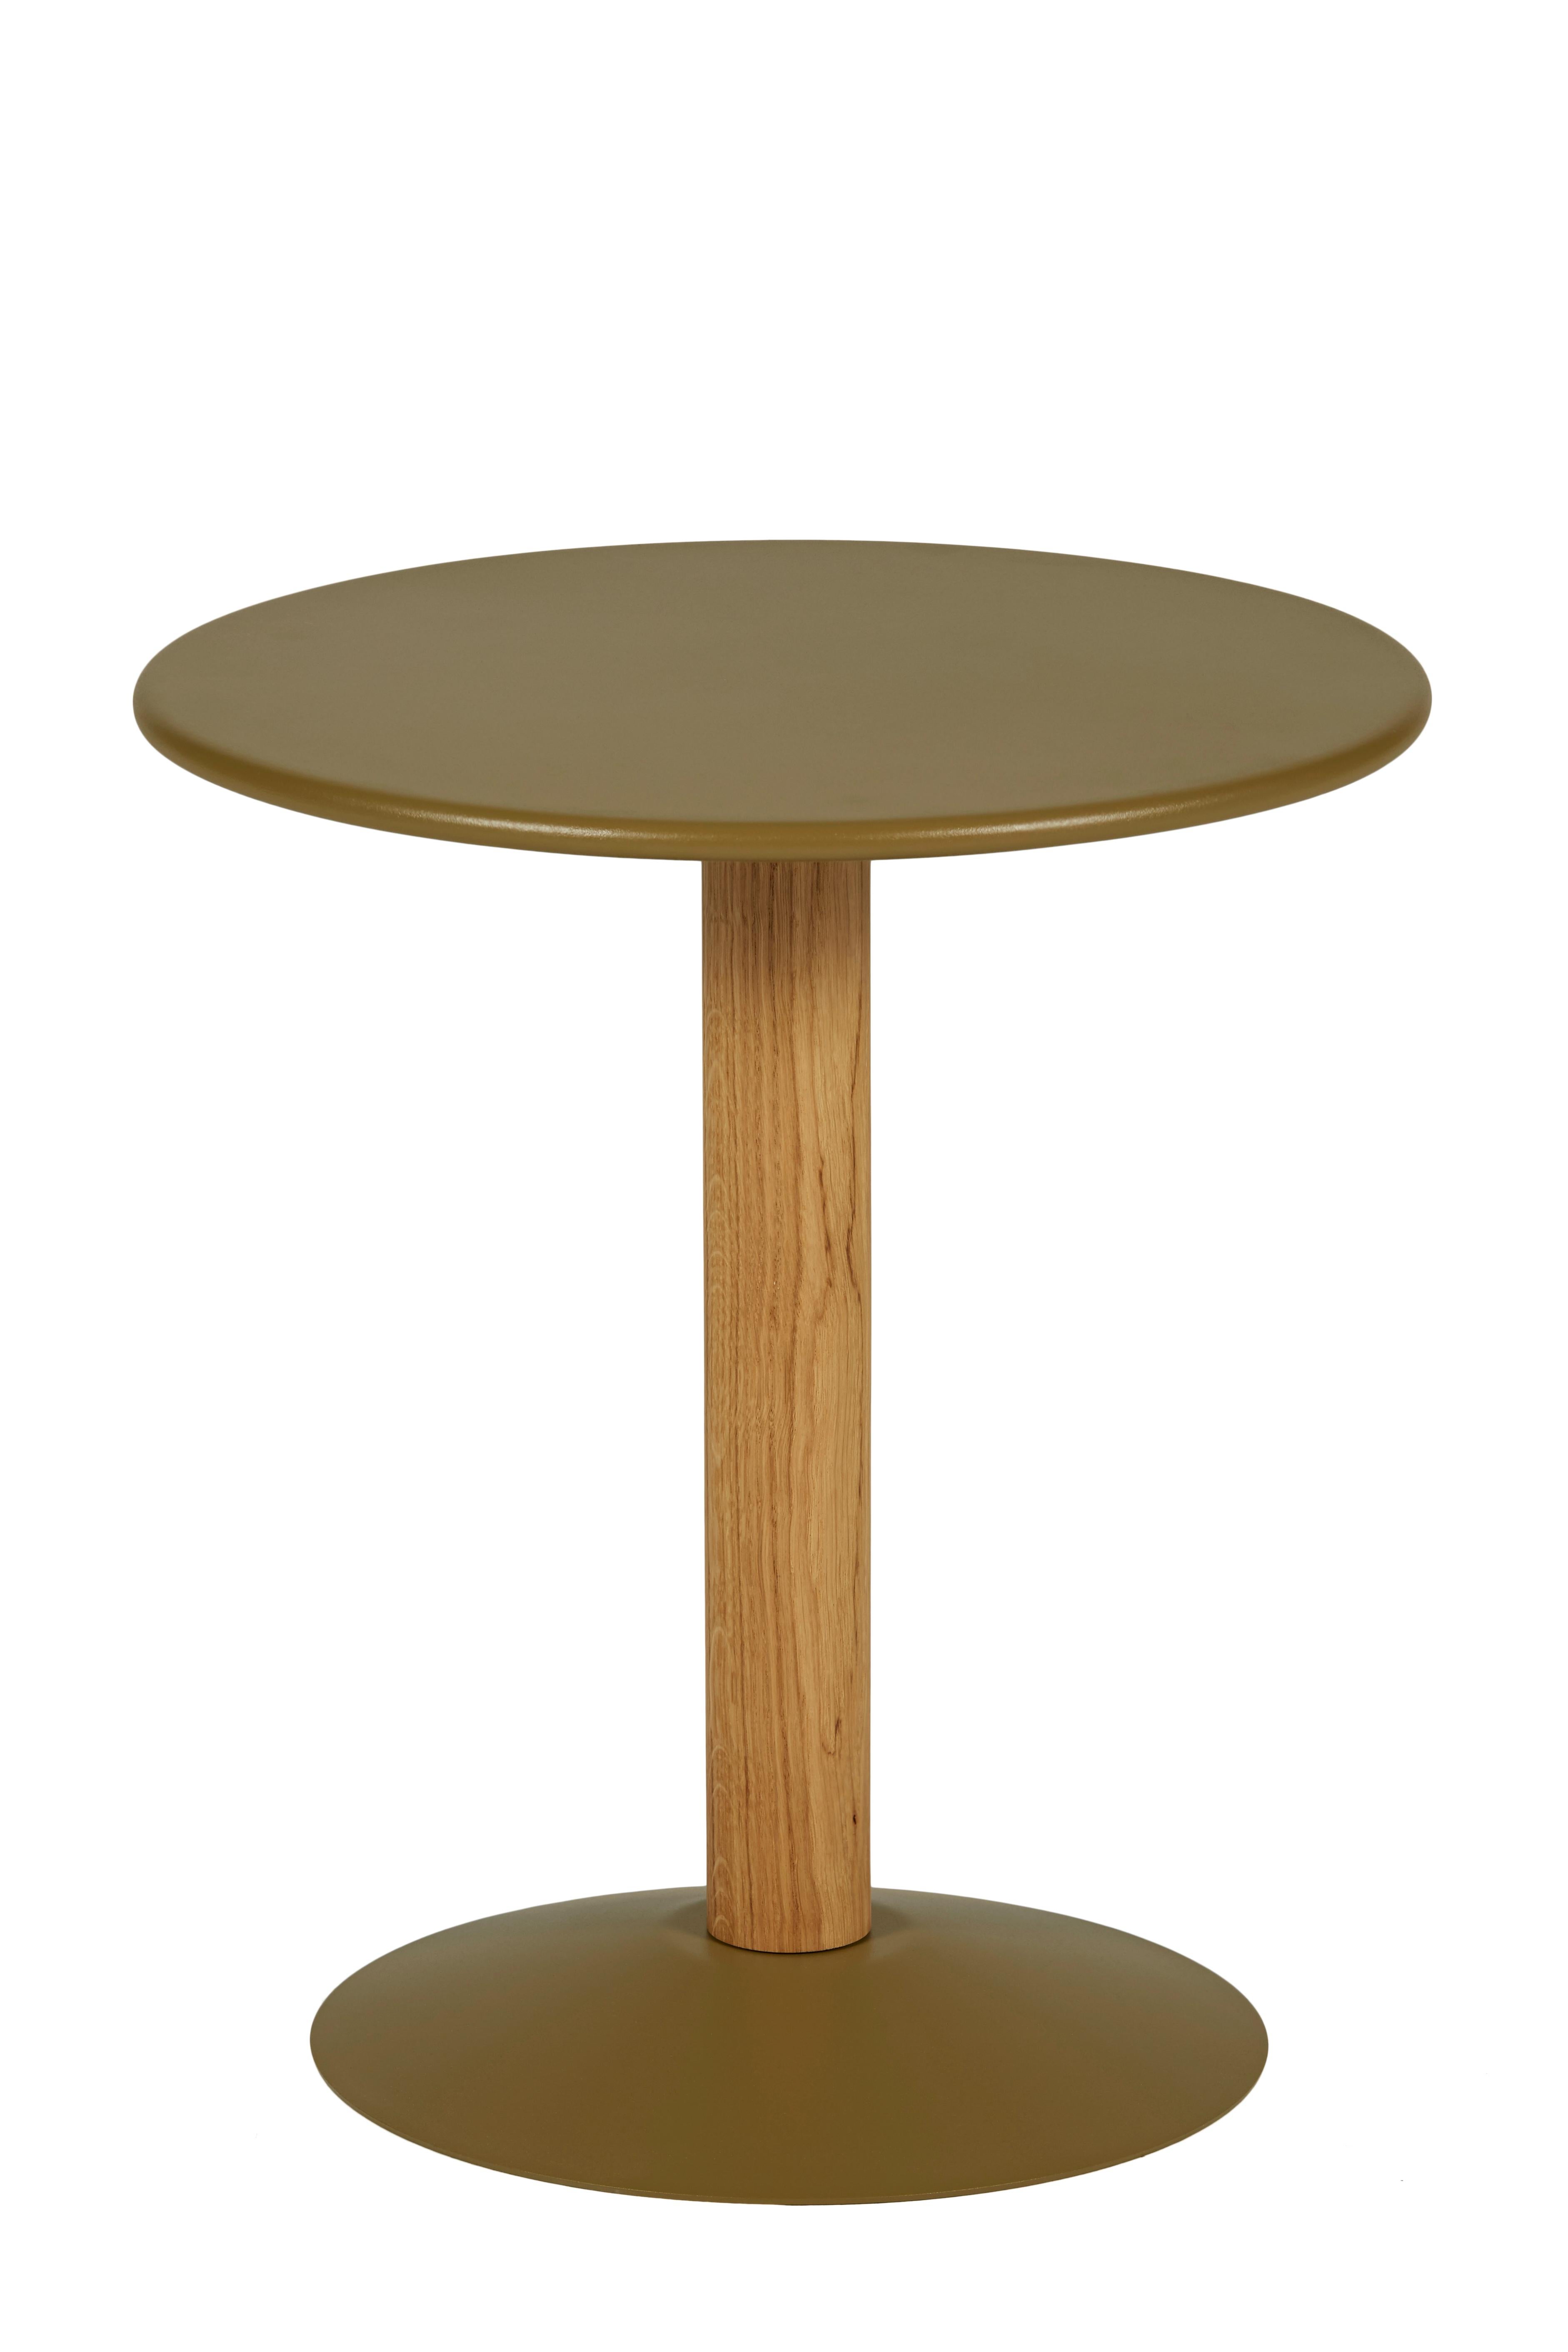 For Sale: Brown (Kaki) Gueridon C16 Round Pedestal Table in Pop Colors by Chantal Andriot & Tolix 2